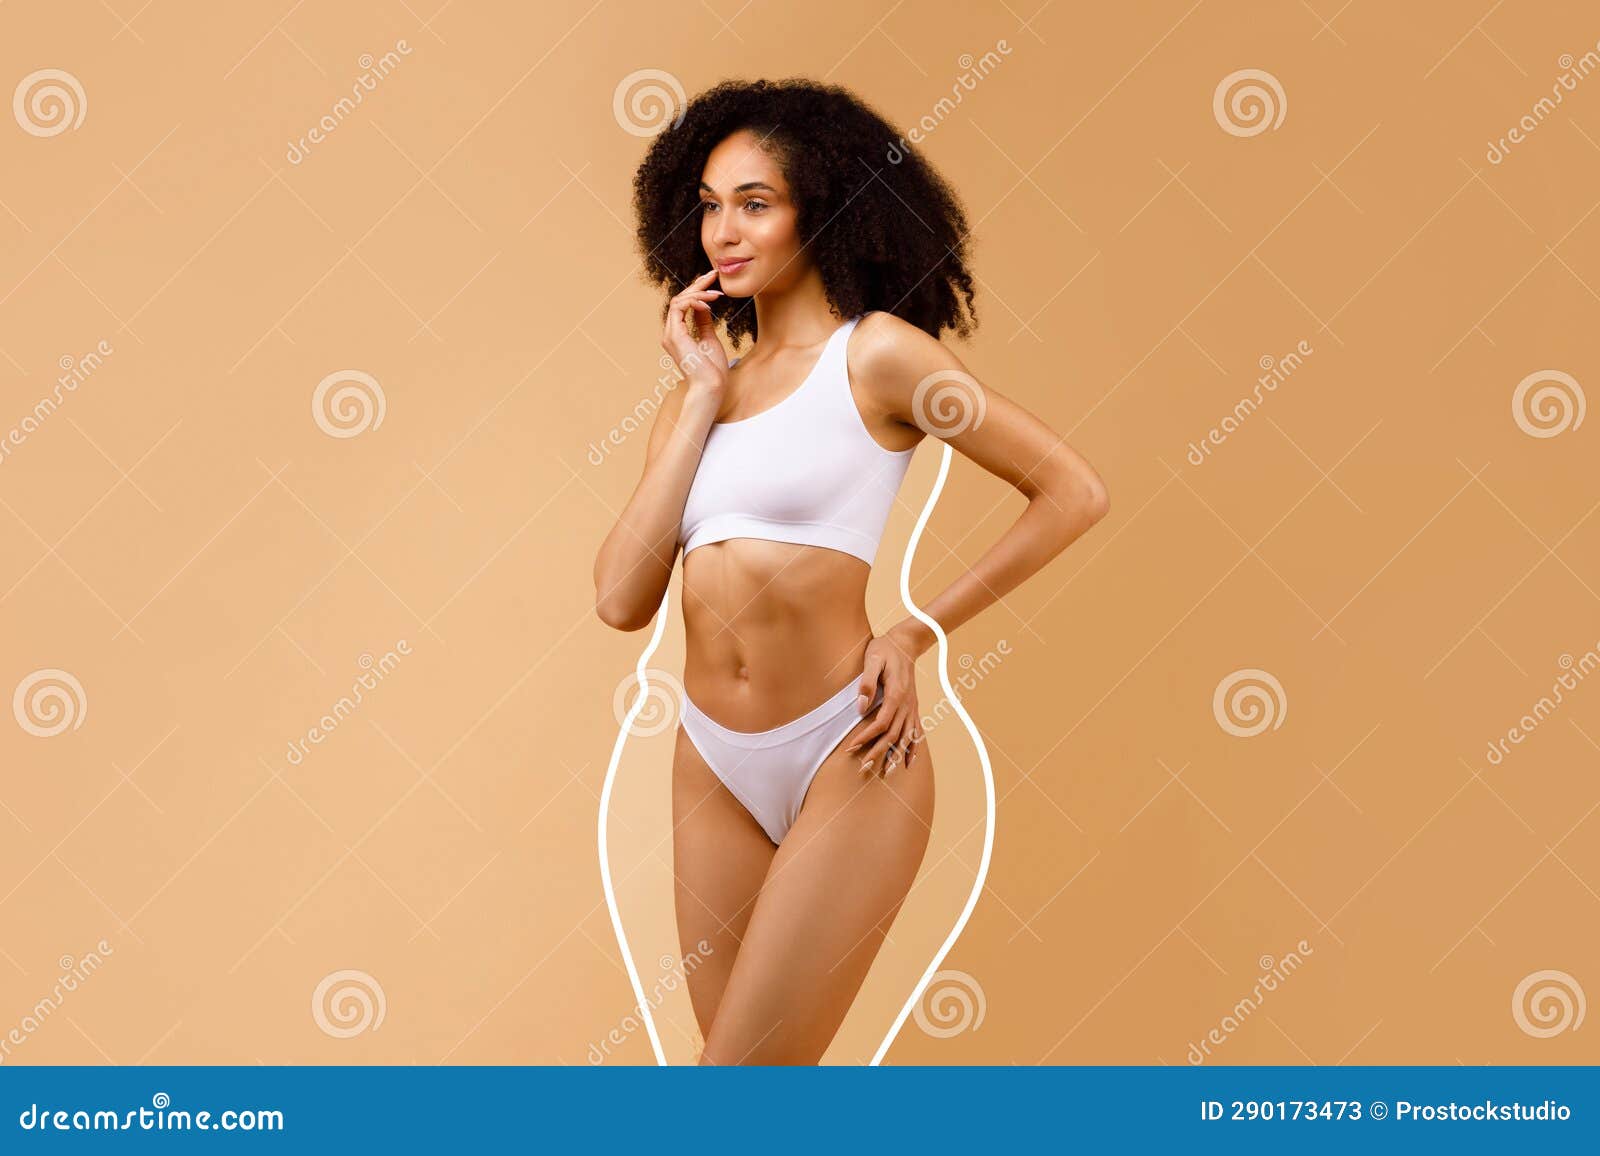 Slim Black Lady with Perfect Body Shape Posing in Underwear Stock